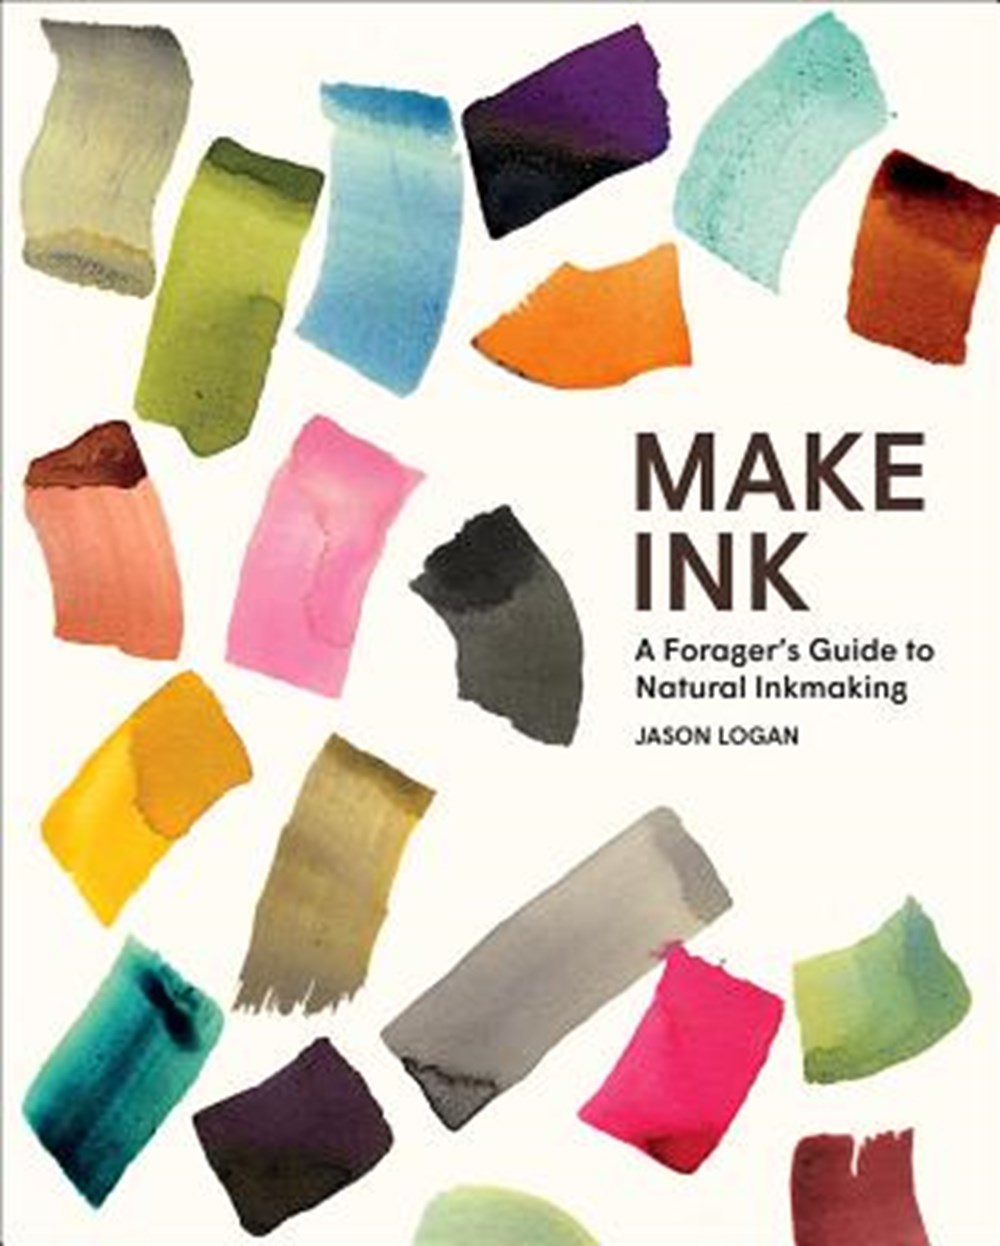 Make Ink A Forager's Guide to Natural Inkmaking